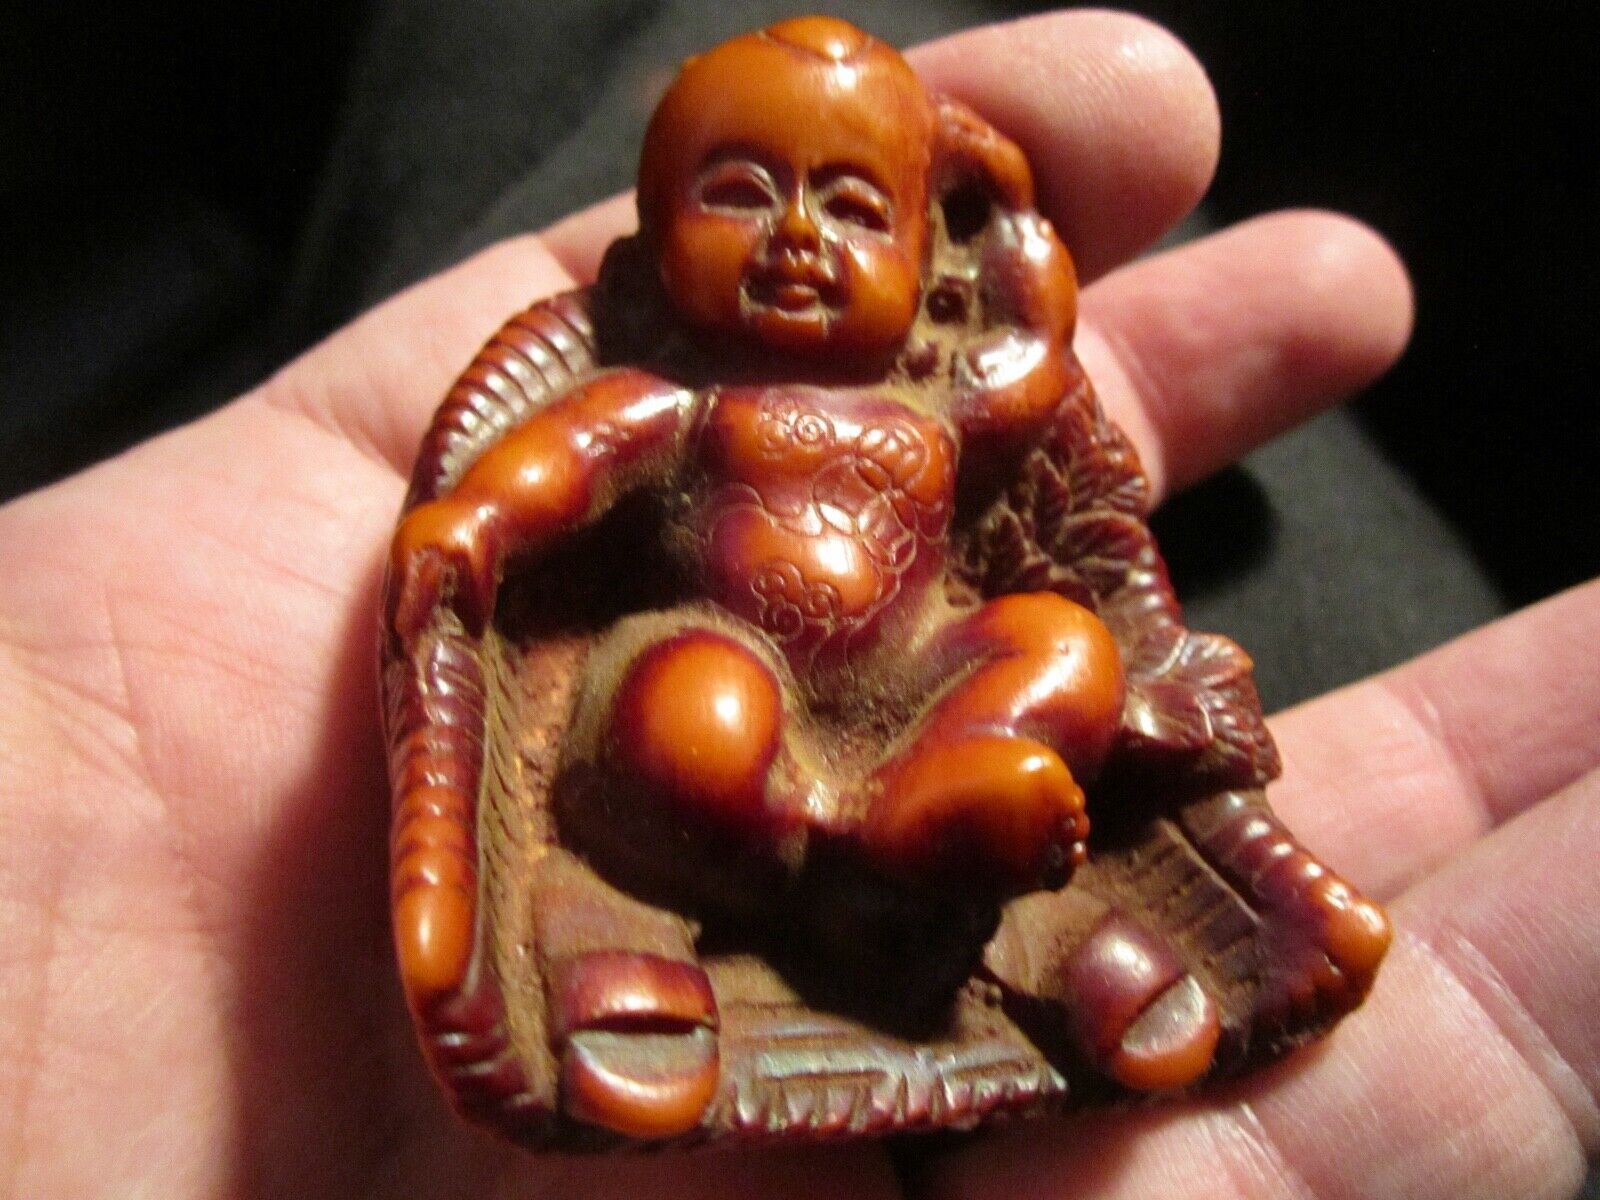 CINNABAR CARVED FIGURINE OF A BABY IN A CHAIR - SPECTACULAR CARVING BBA-37